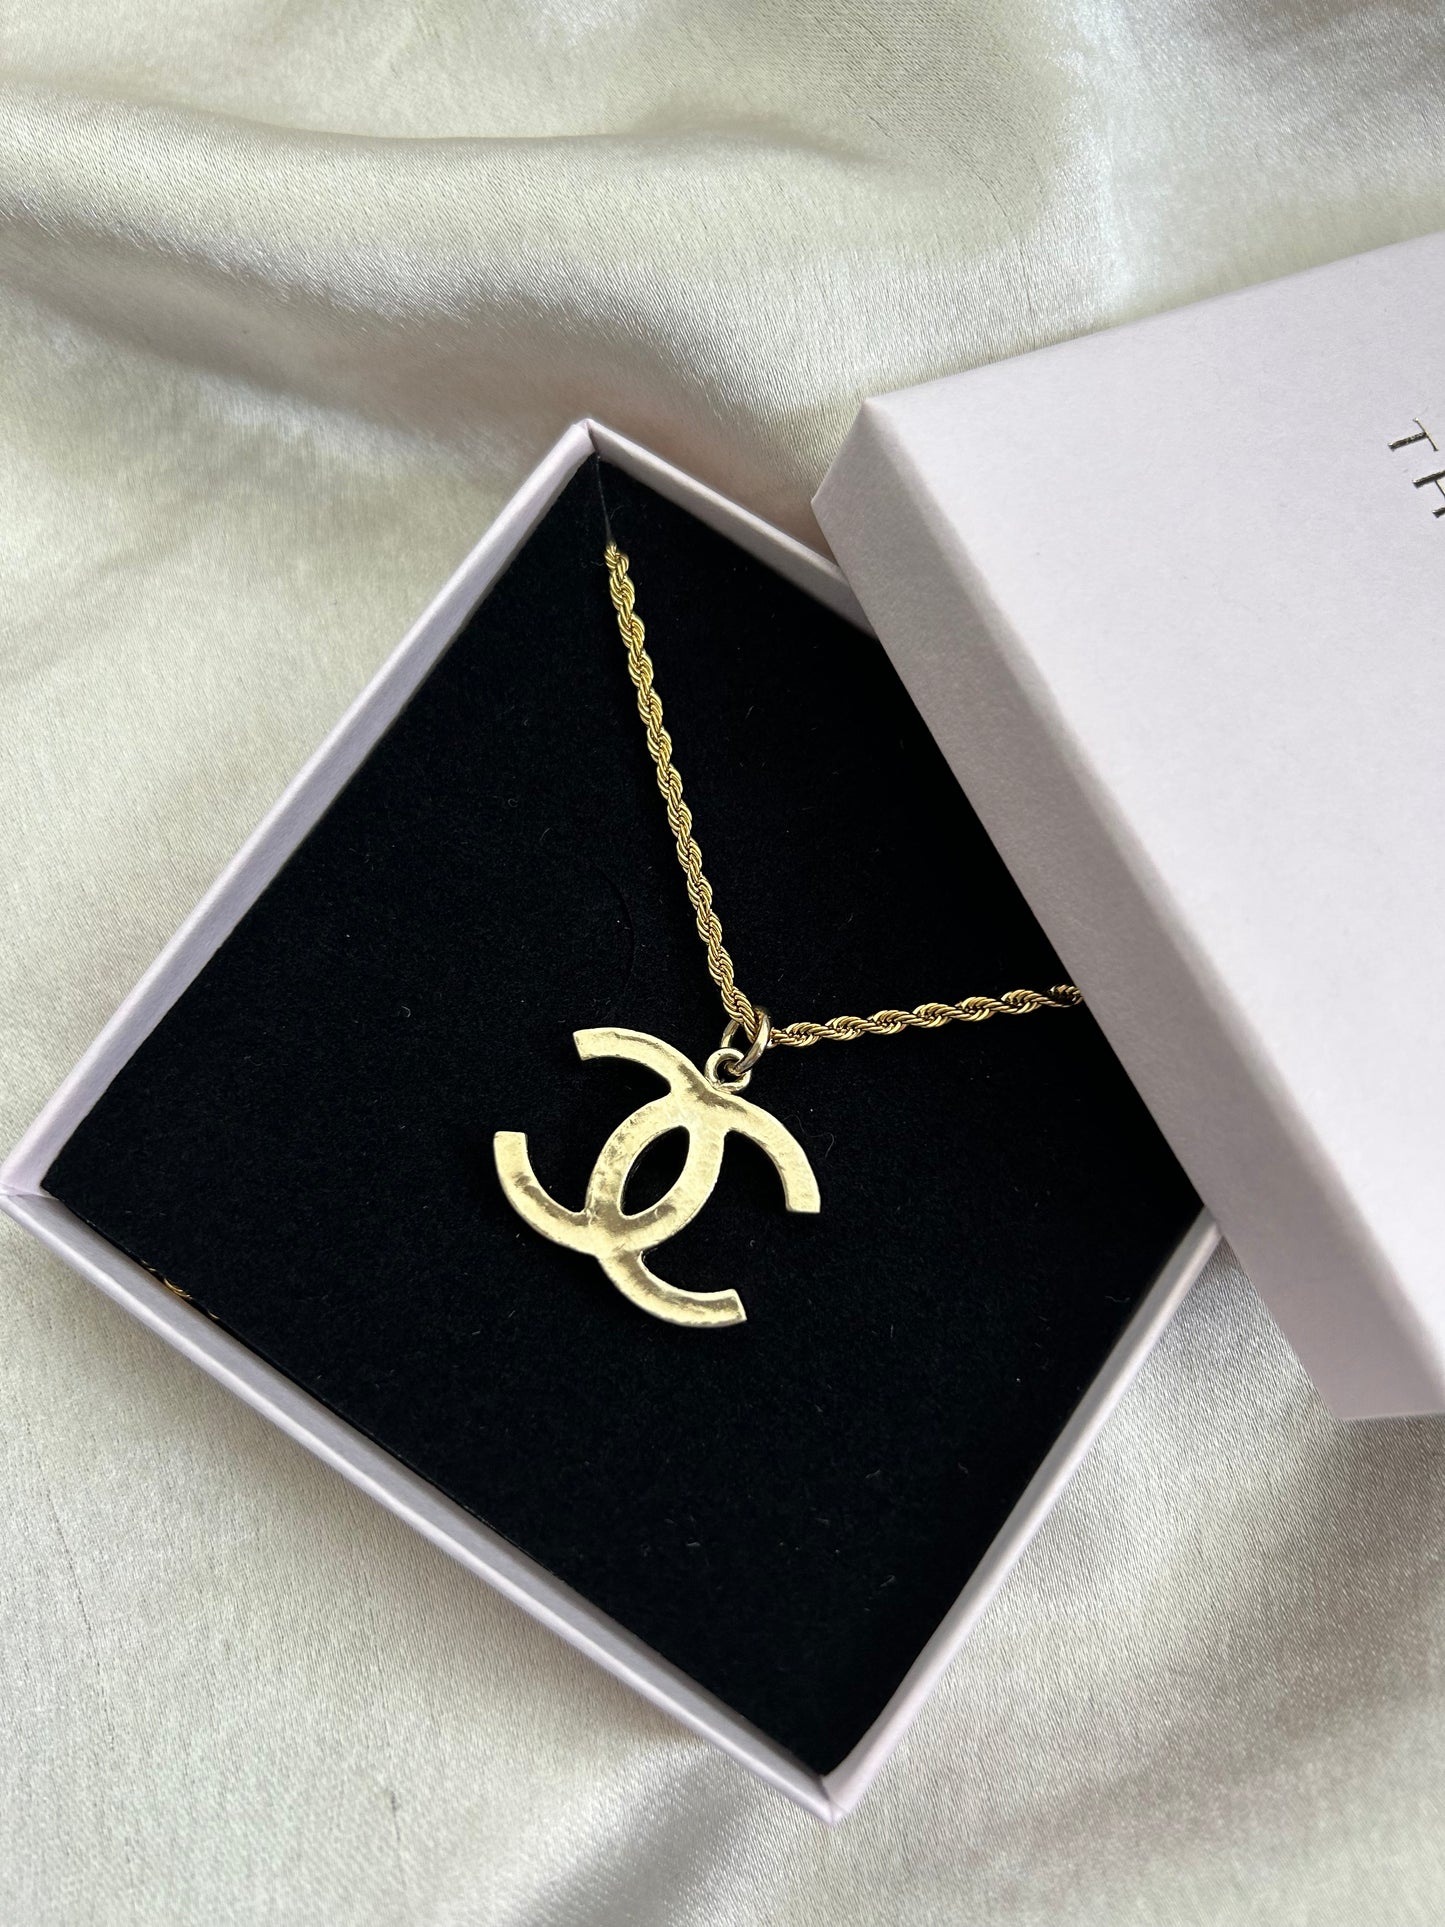 Authentic Reworked Chanel Necklace - Large CC